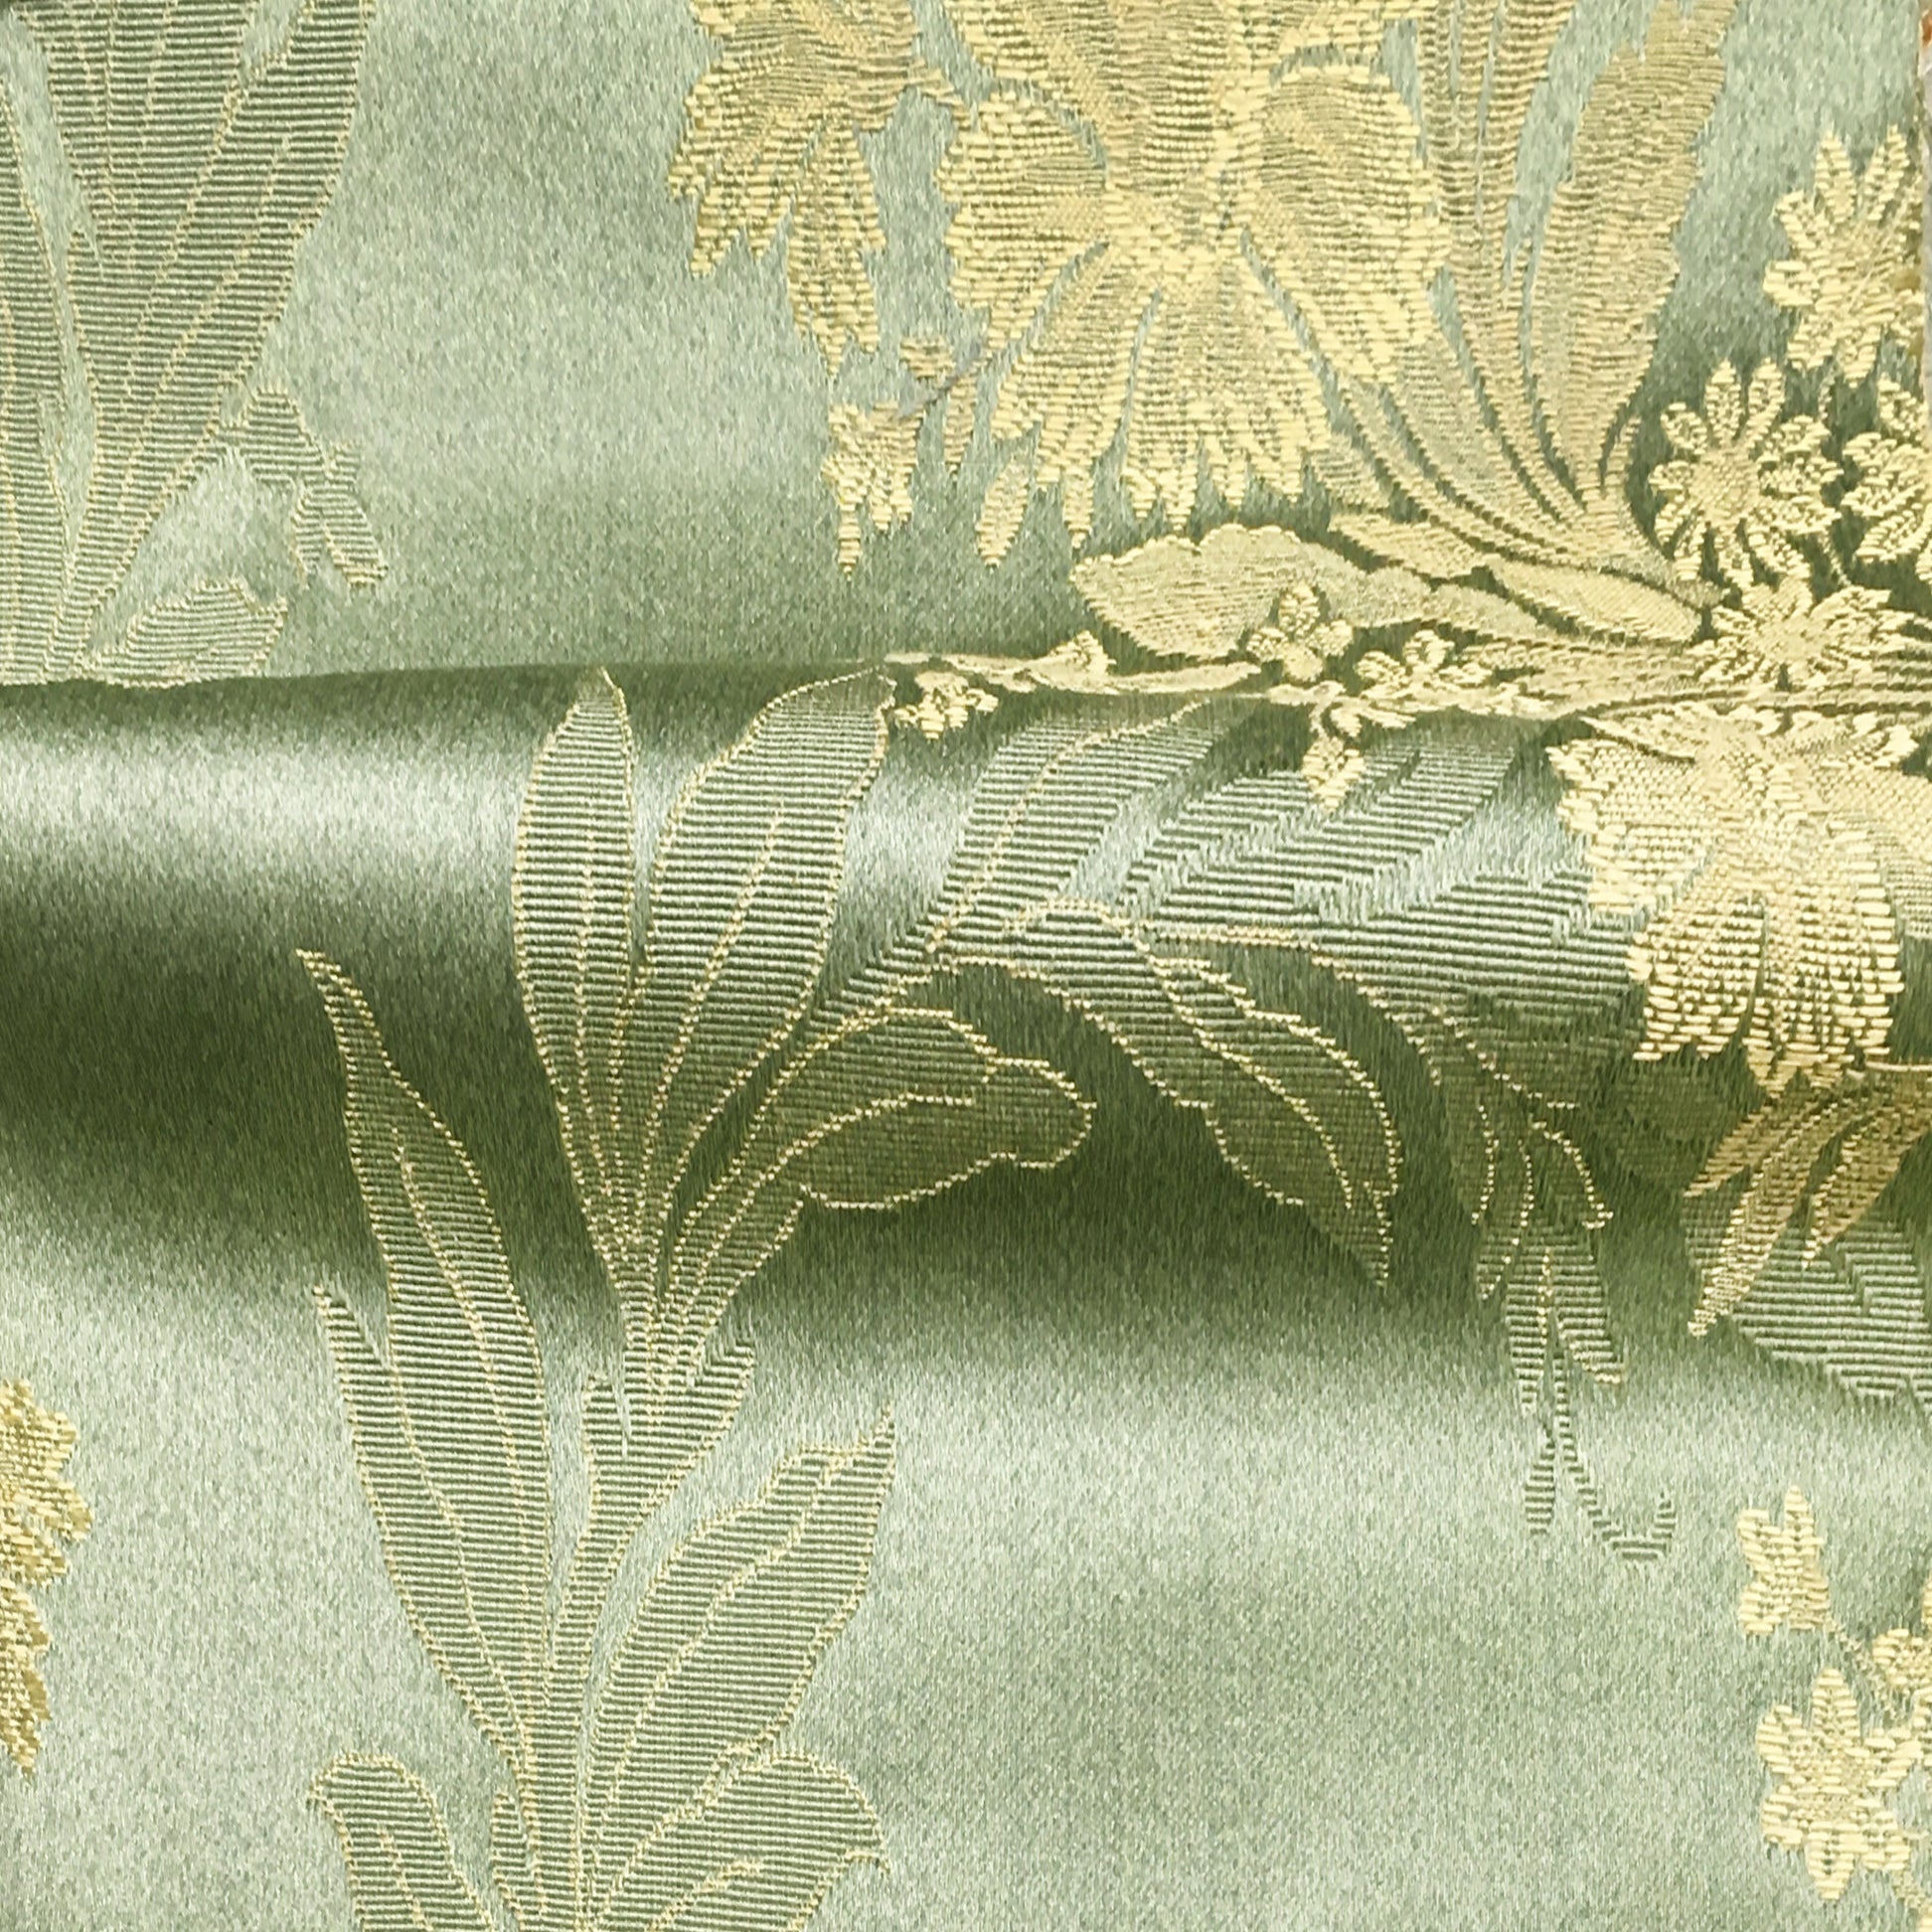 Gold, Contemporary Floral Jacquard Woven Upholstery Fabric By The Yard